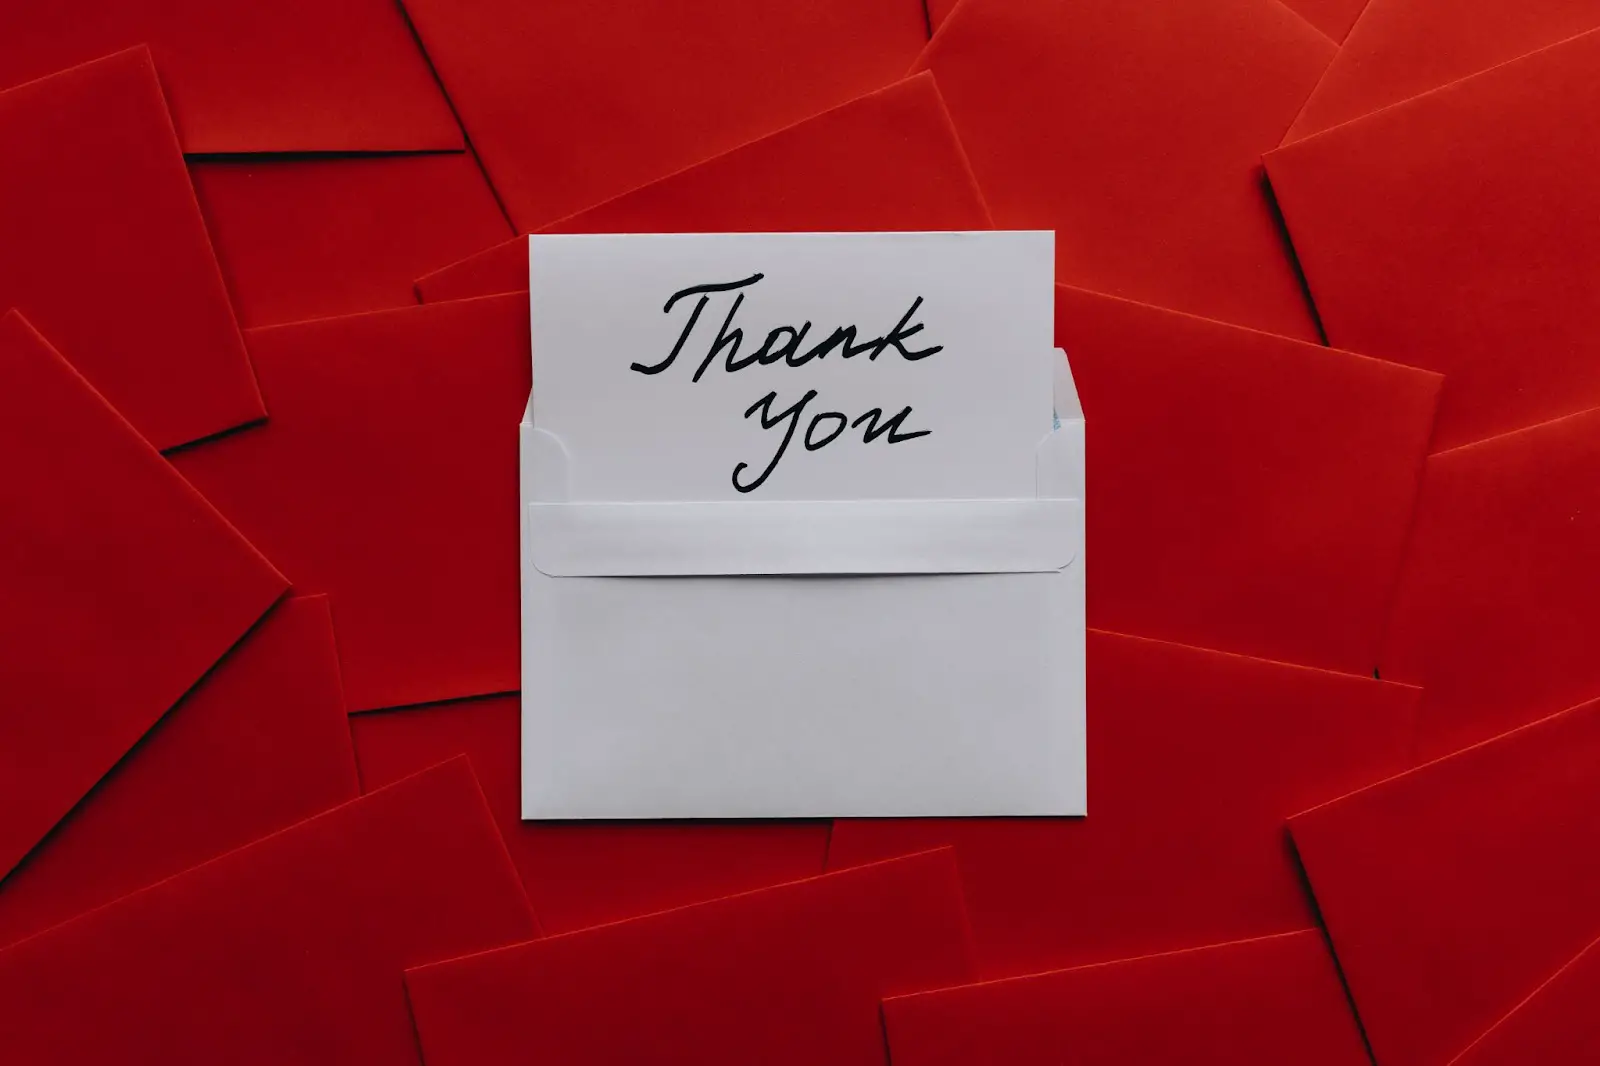  Thank-You Letter In A Cover